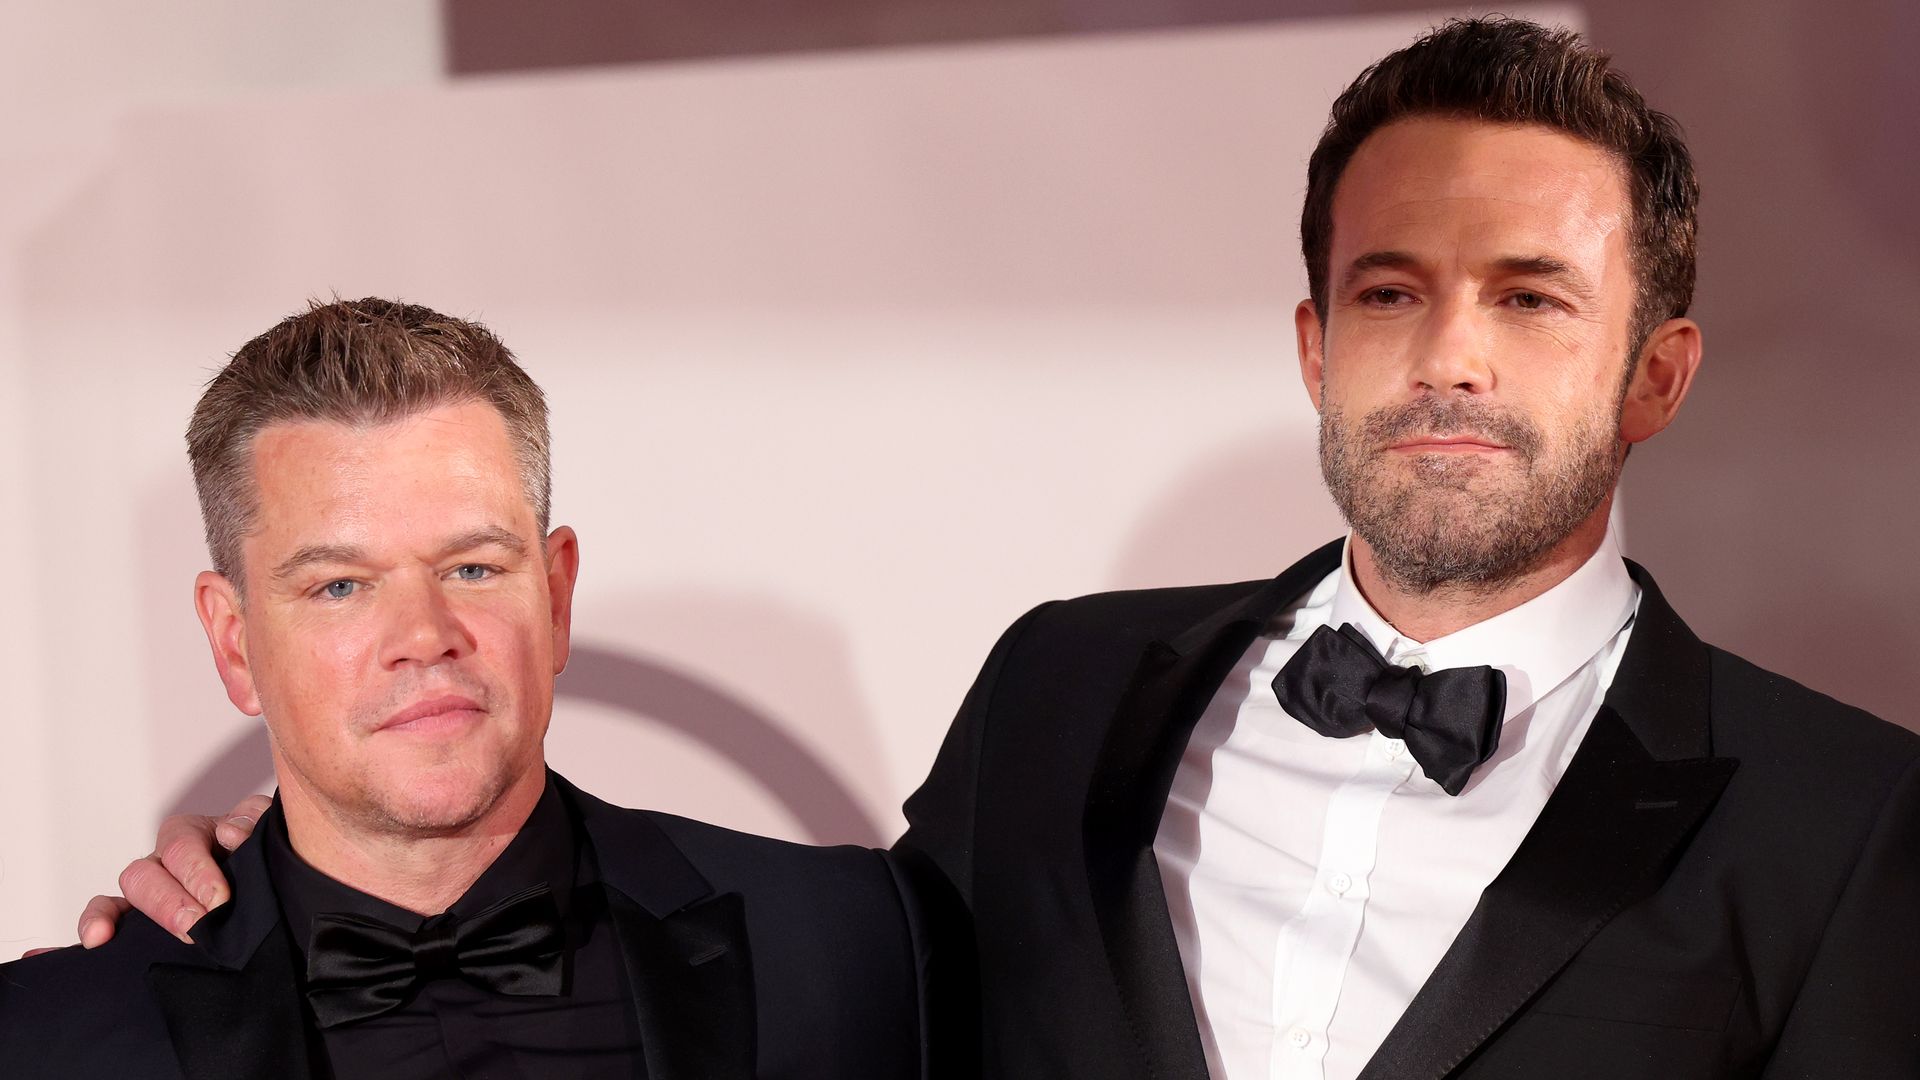 Ben Affleck and Matt Damon attend the red carpet of the movie "The Last Duel" during the 78th Venice International Film Festival on September 10, 2021 in Venice, Italy.